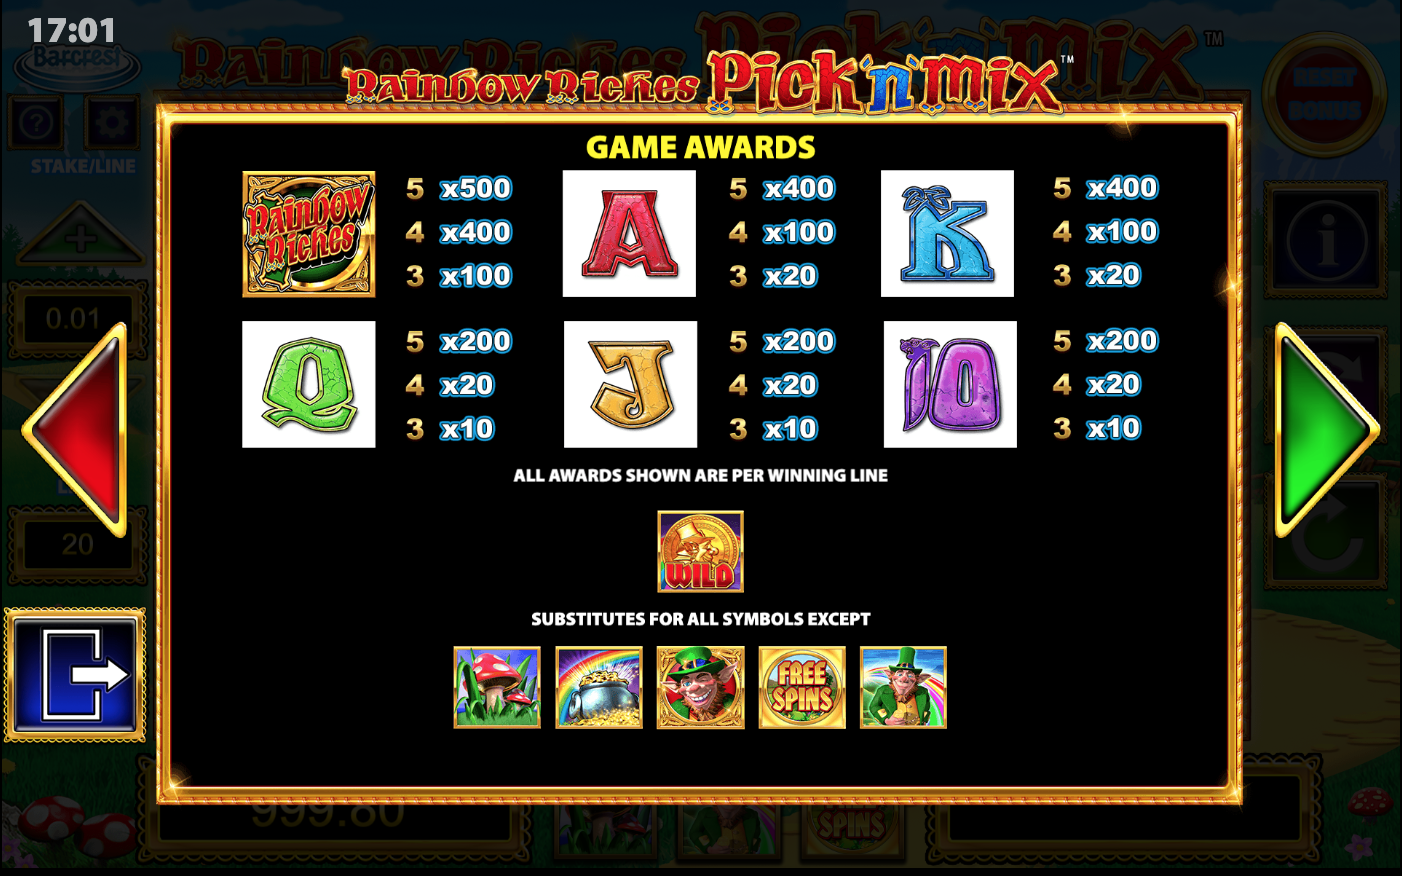 Rainbow Riches Pick'n'Mix full paytable